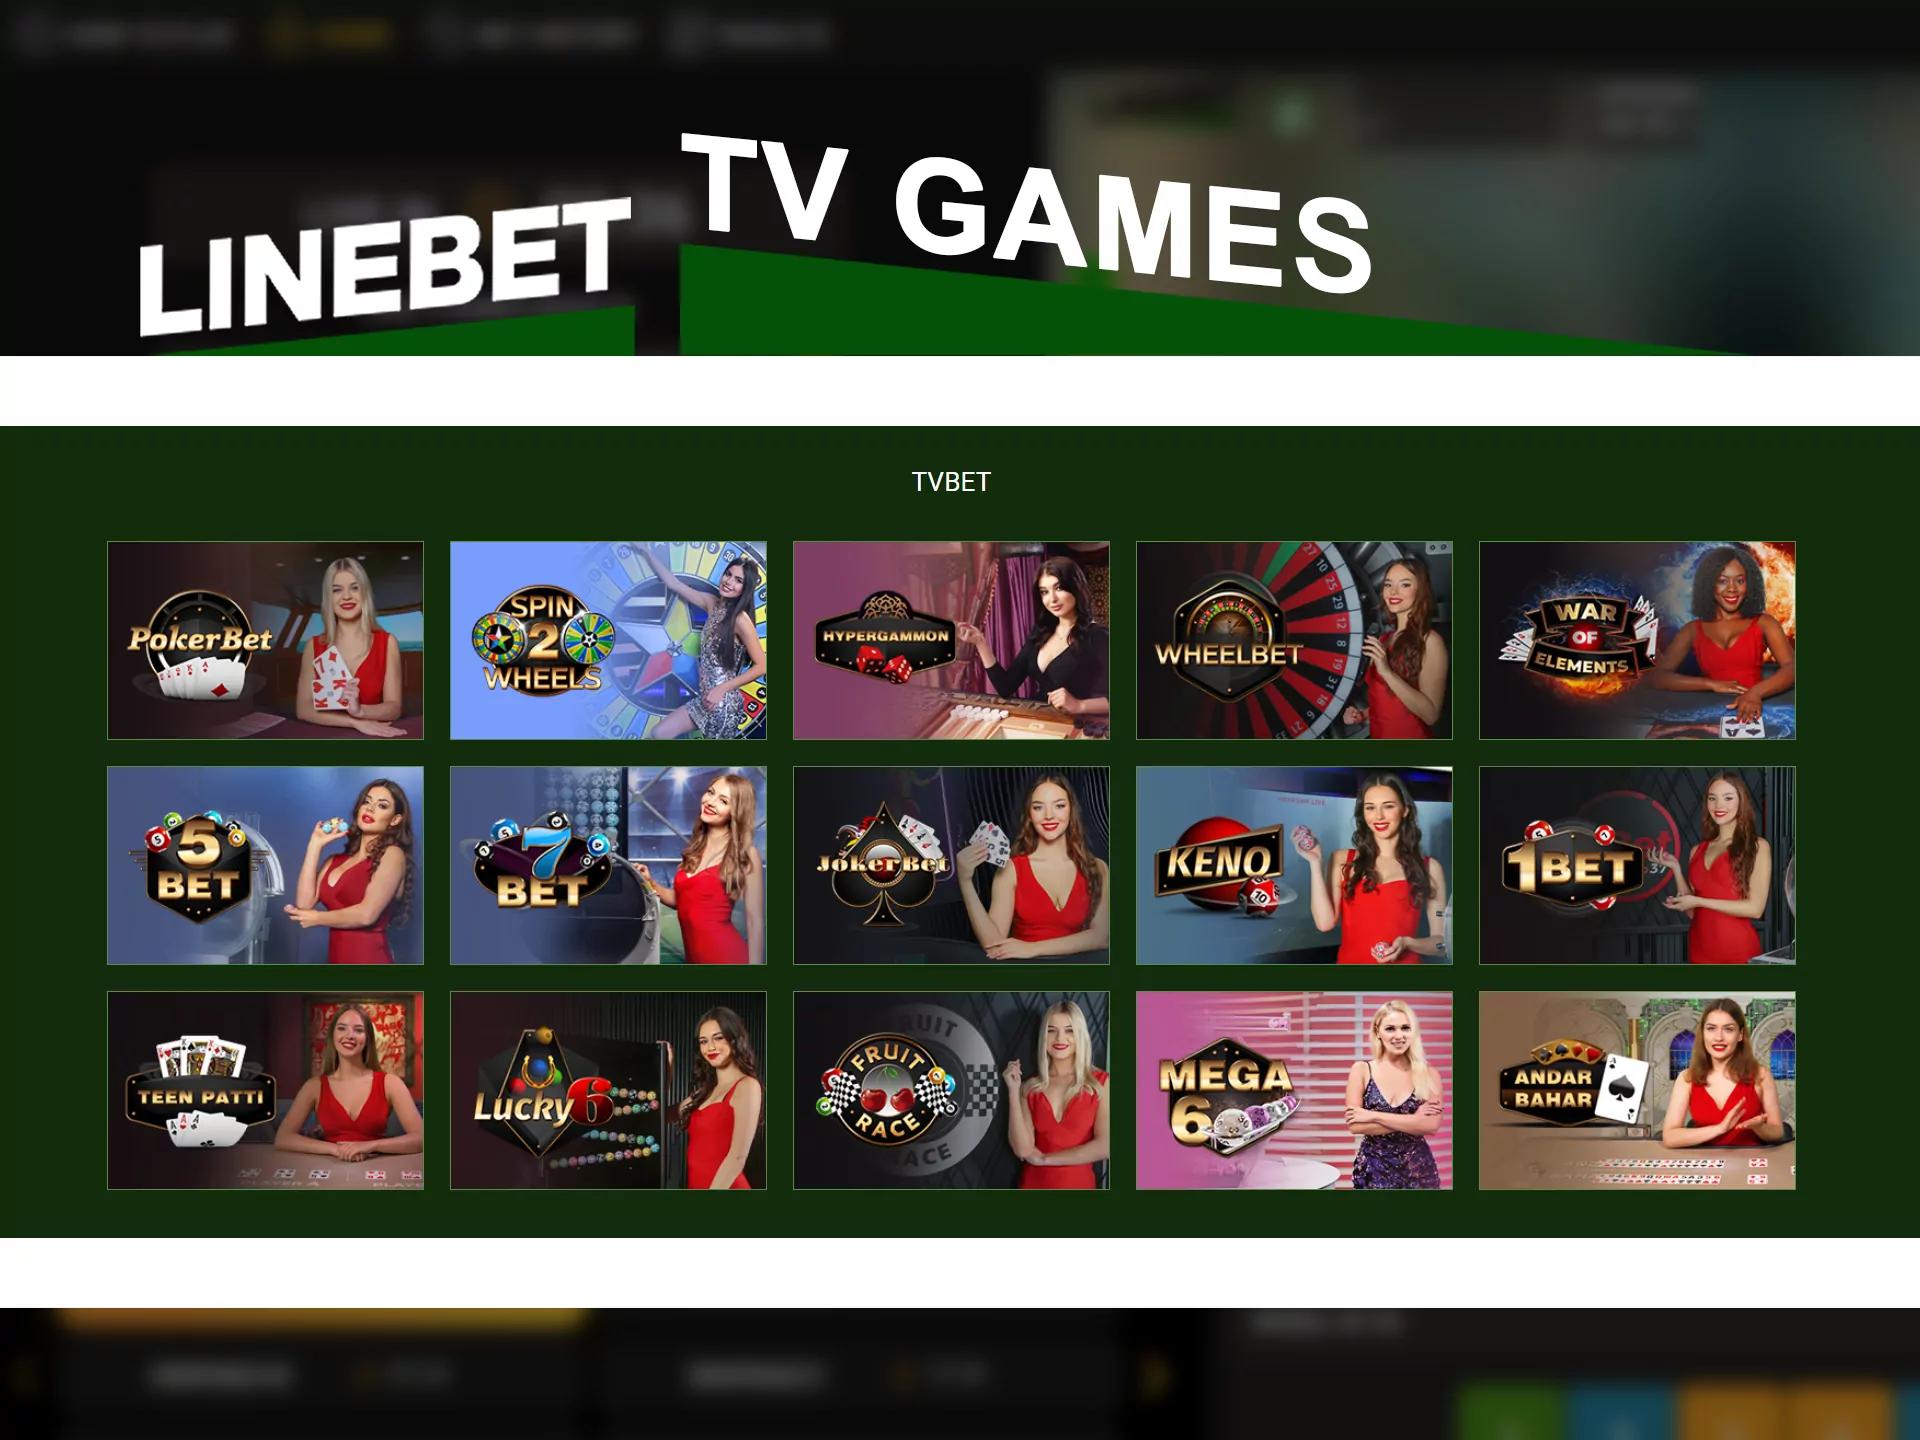 Play different TV games at Linebet.